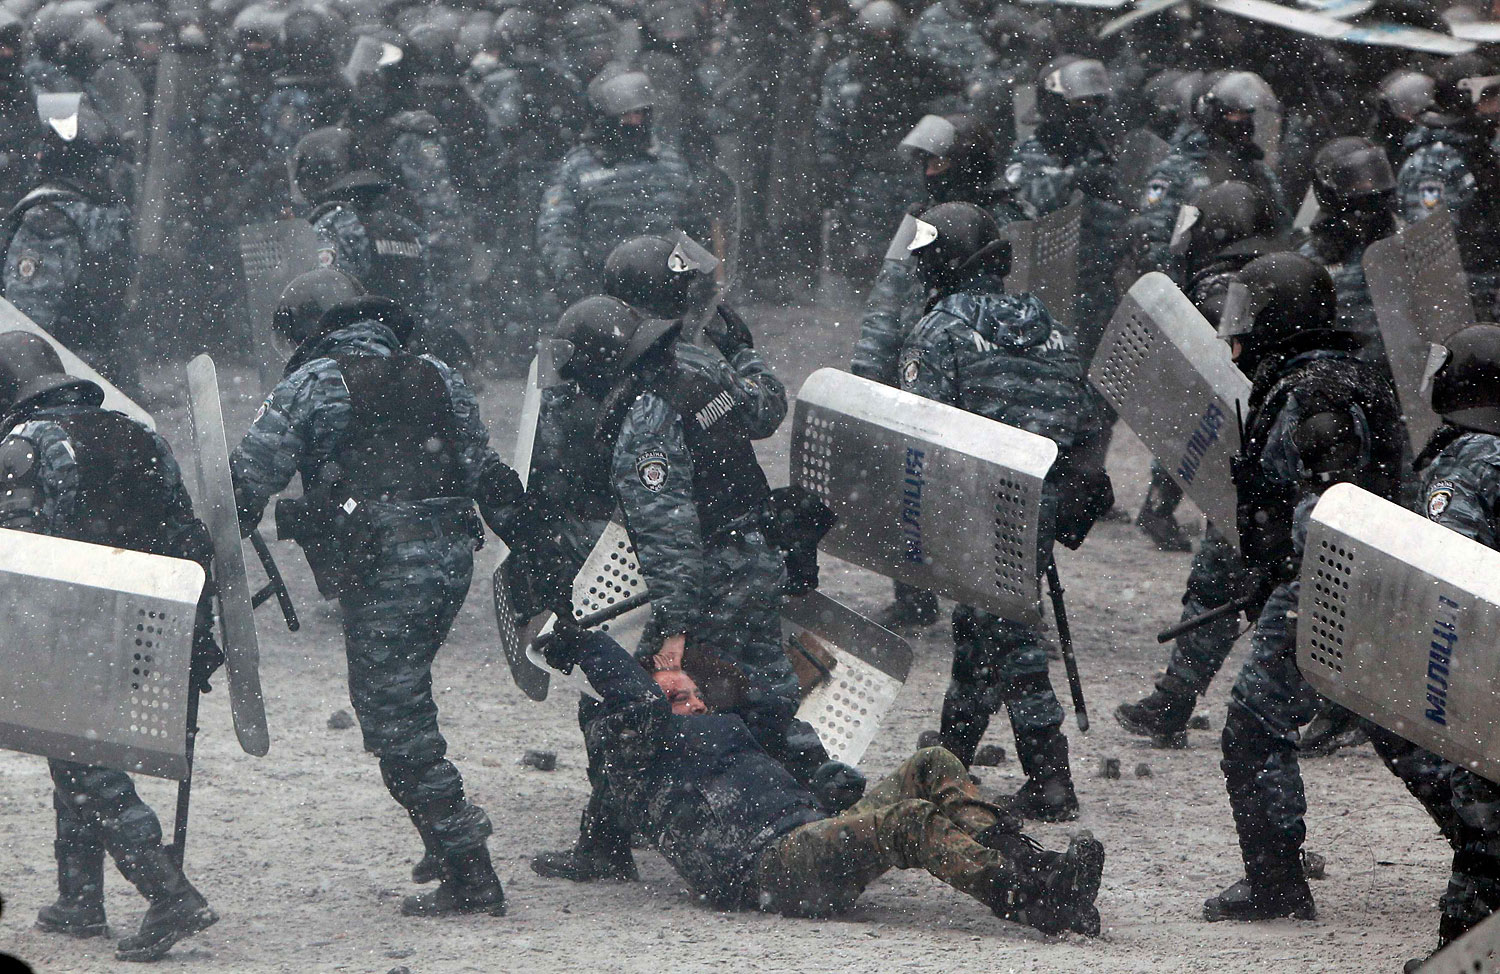 Riot police officers hold a man during clashes with pro-European protesters in Kiev, Jan. 22, 2014.